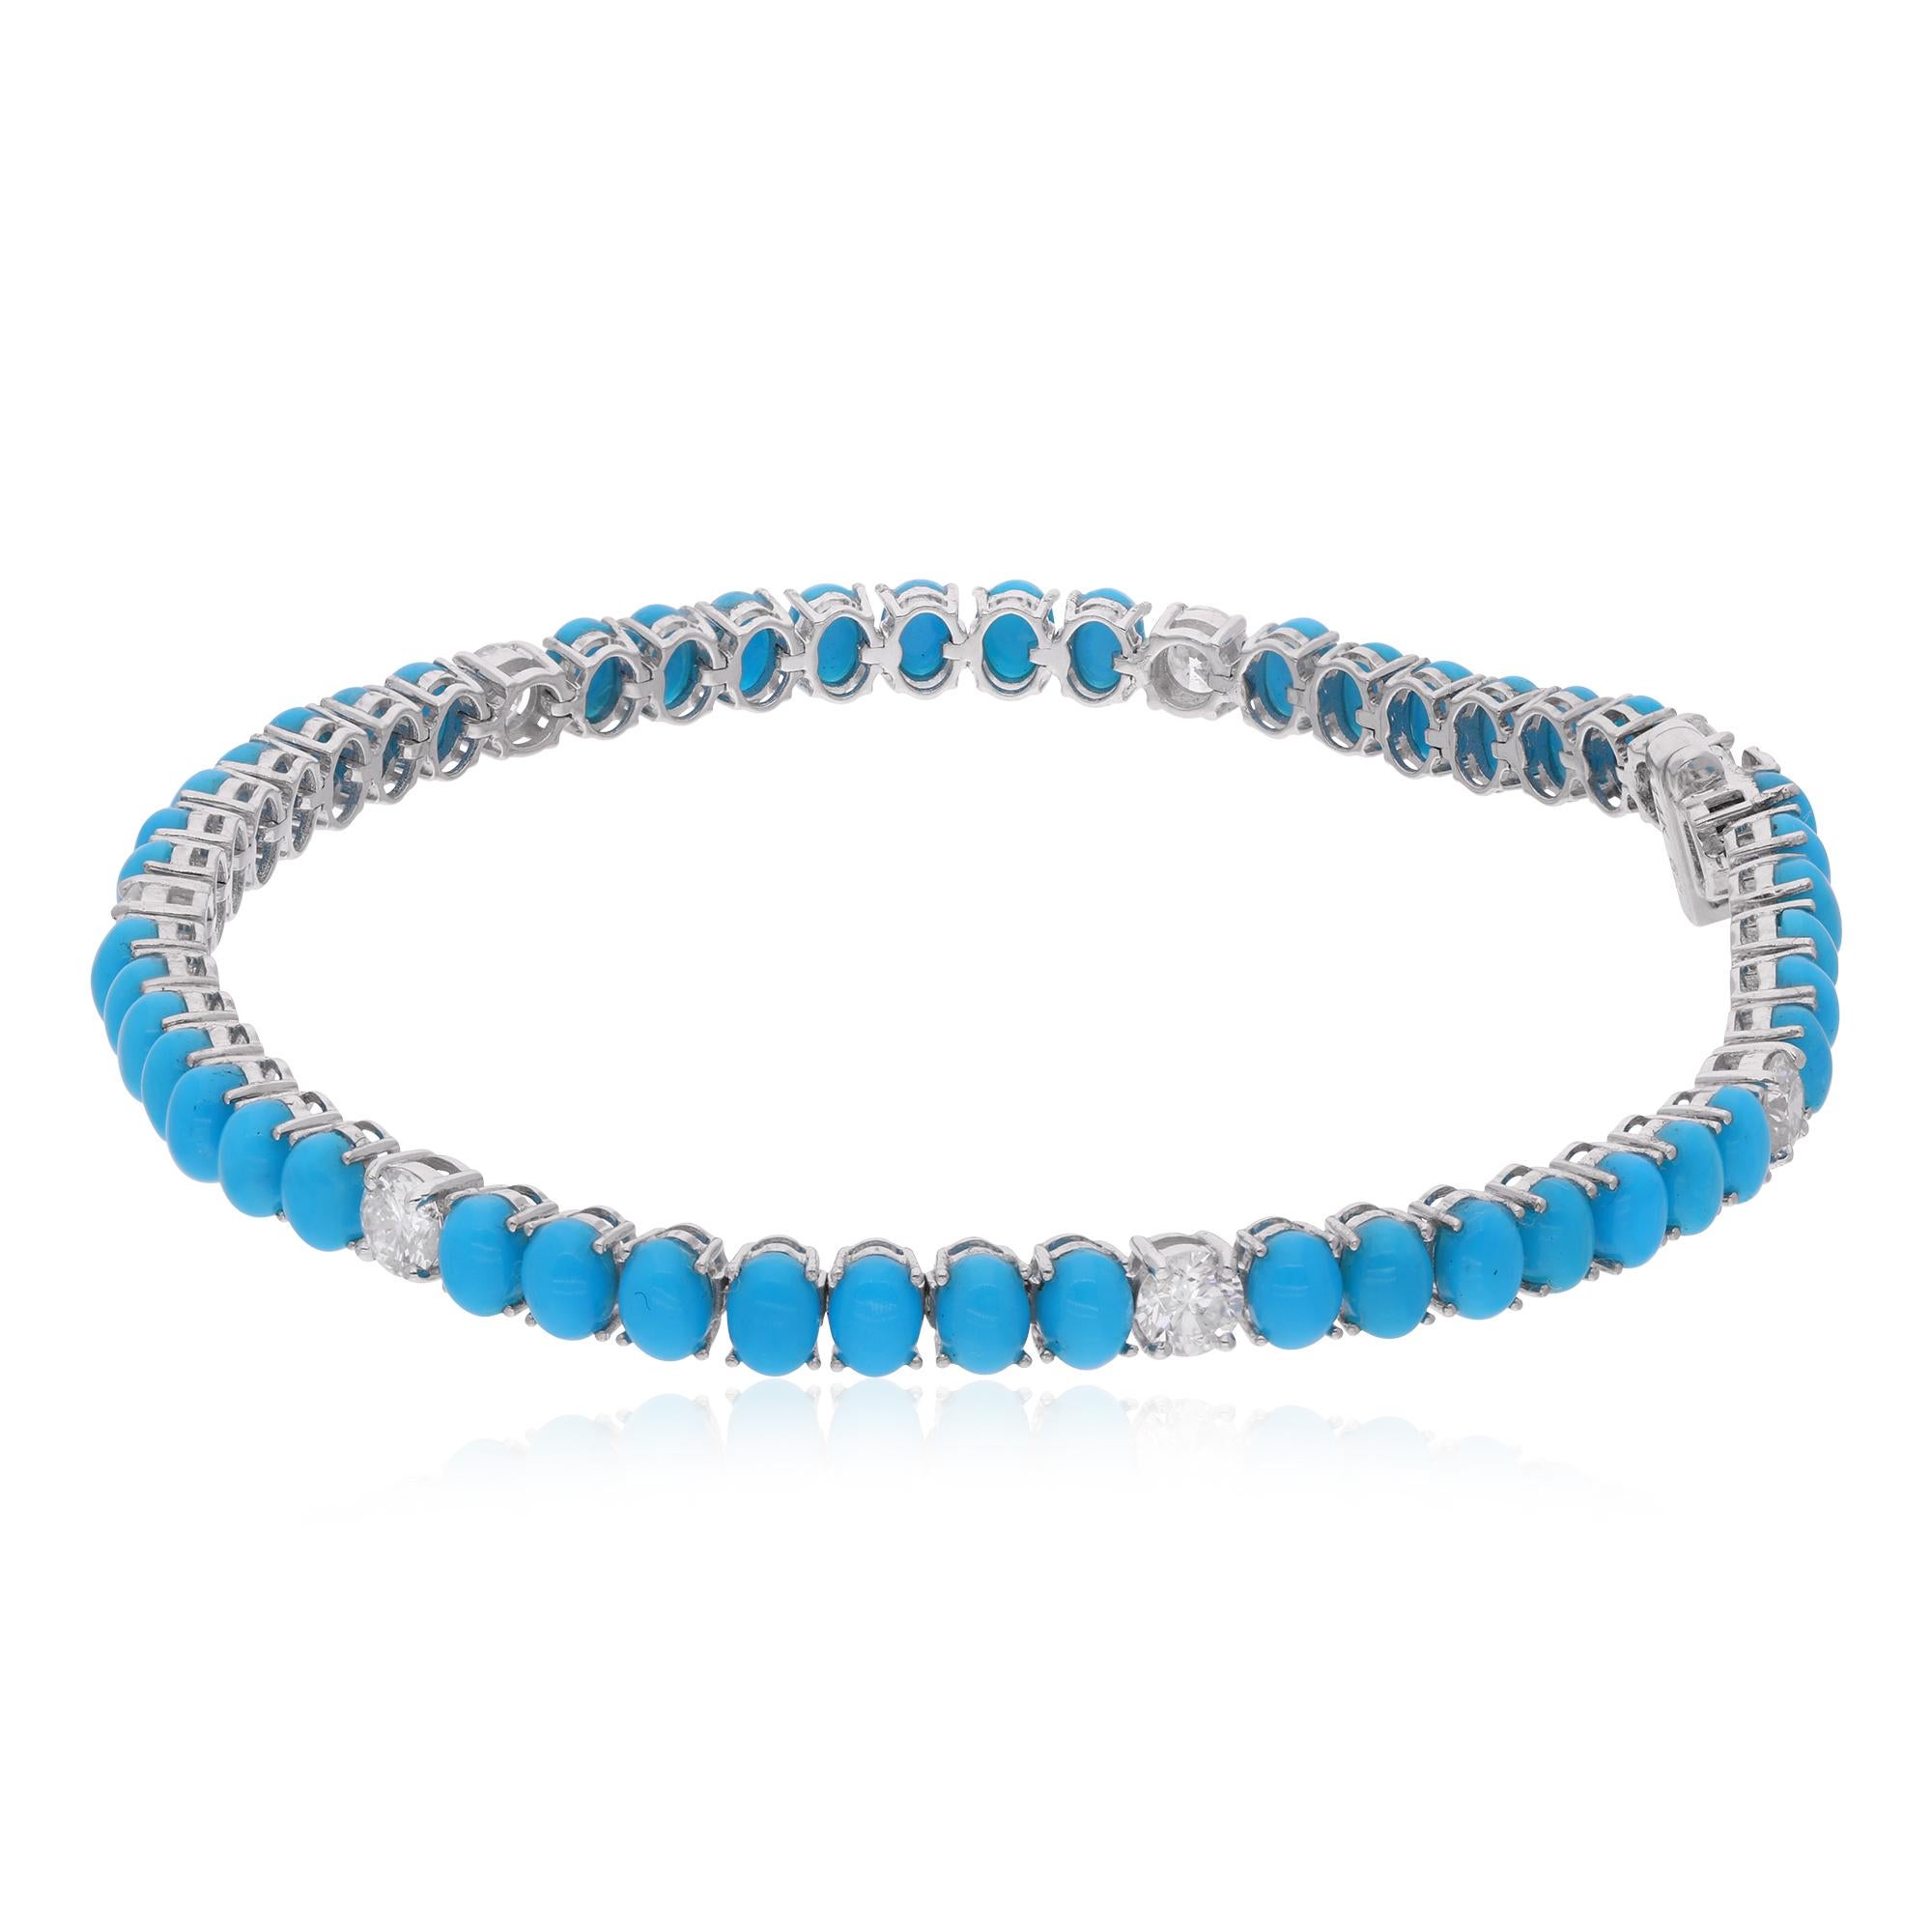 Overall, this piece of jewelry seems to be a luxurious and exquisite creation, combining the elegance of diamonds and the distinct beauty of Arizona turquoise. The use of 14 karat white gold and the handmade aspect further enhance its value and